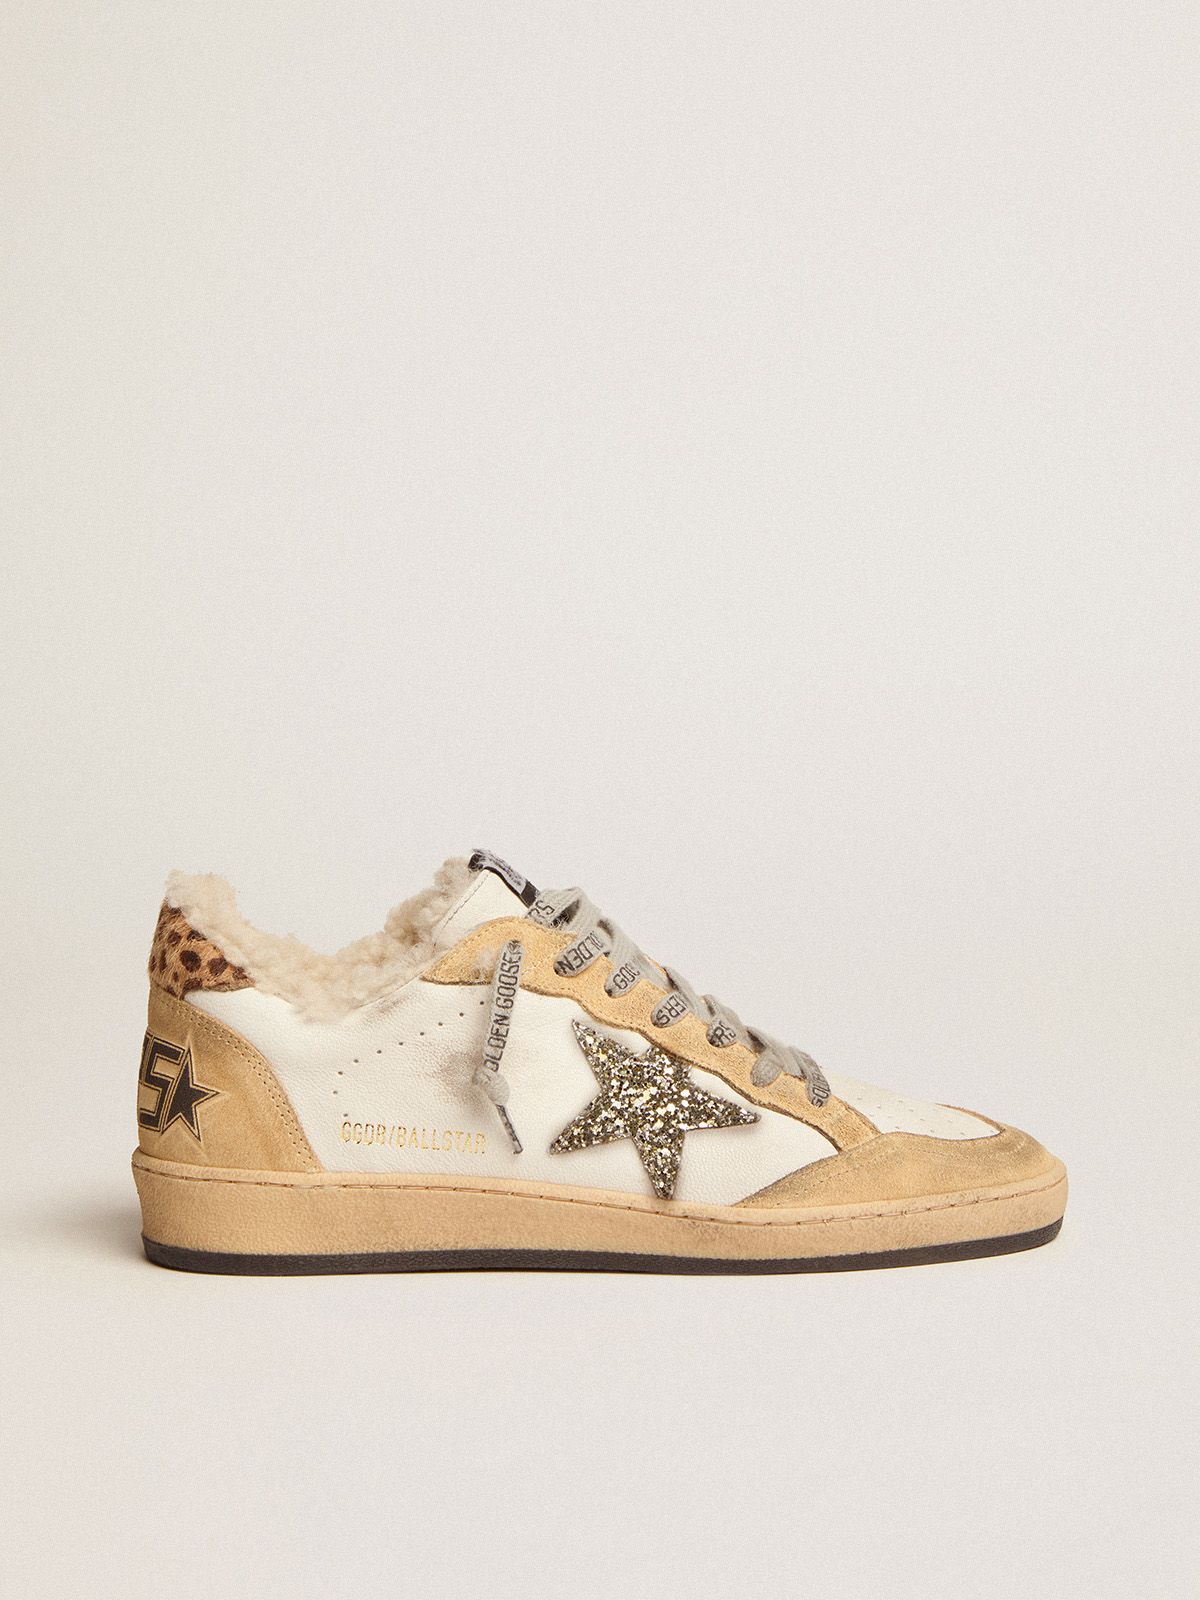 golden goose white Ball in and star lining with shearling sneakers Star platinum-colored glitter nappa leather